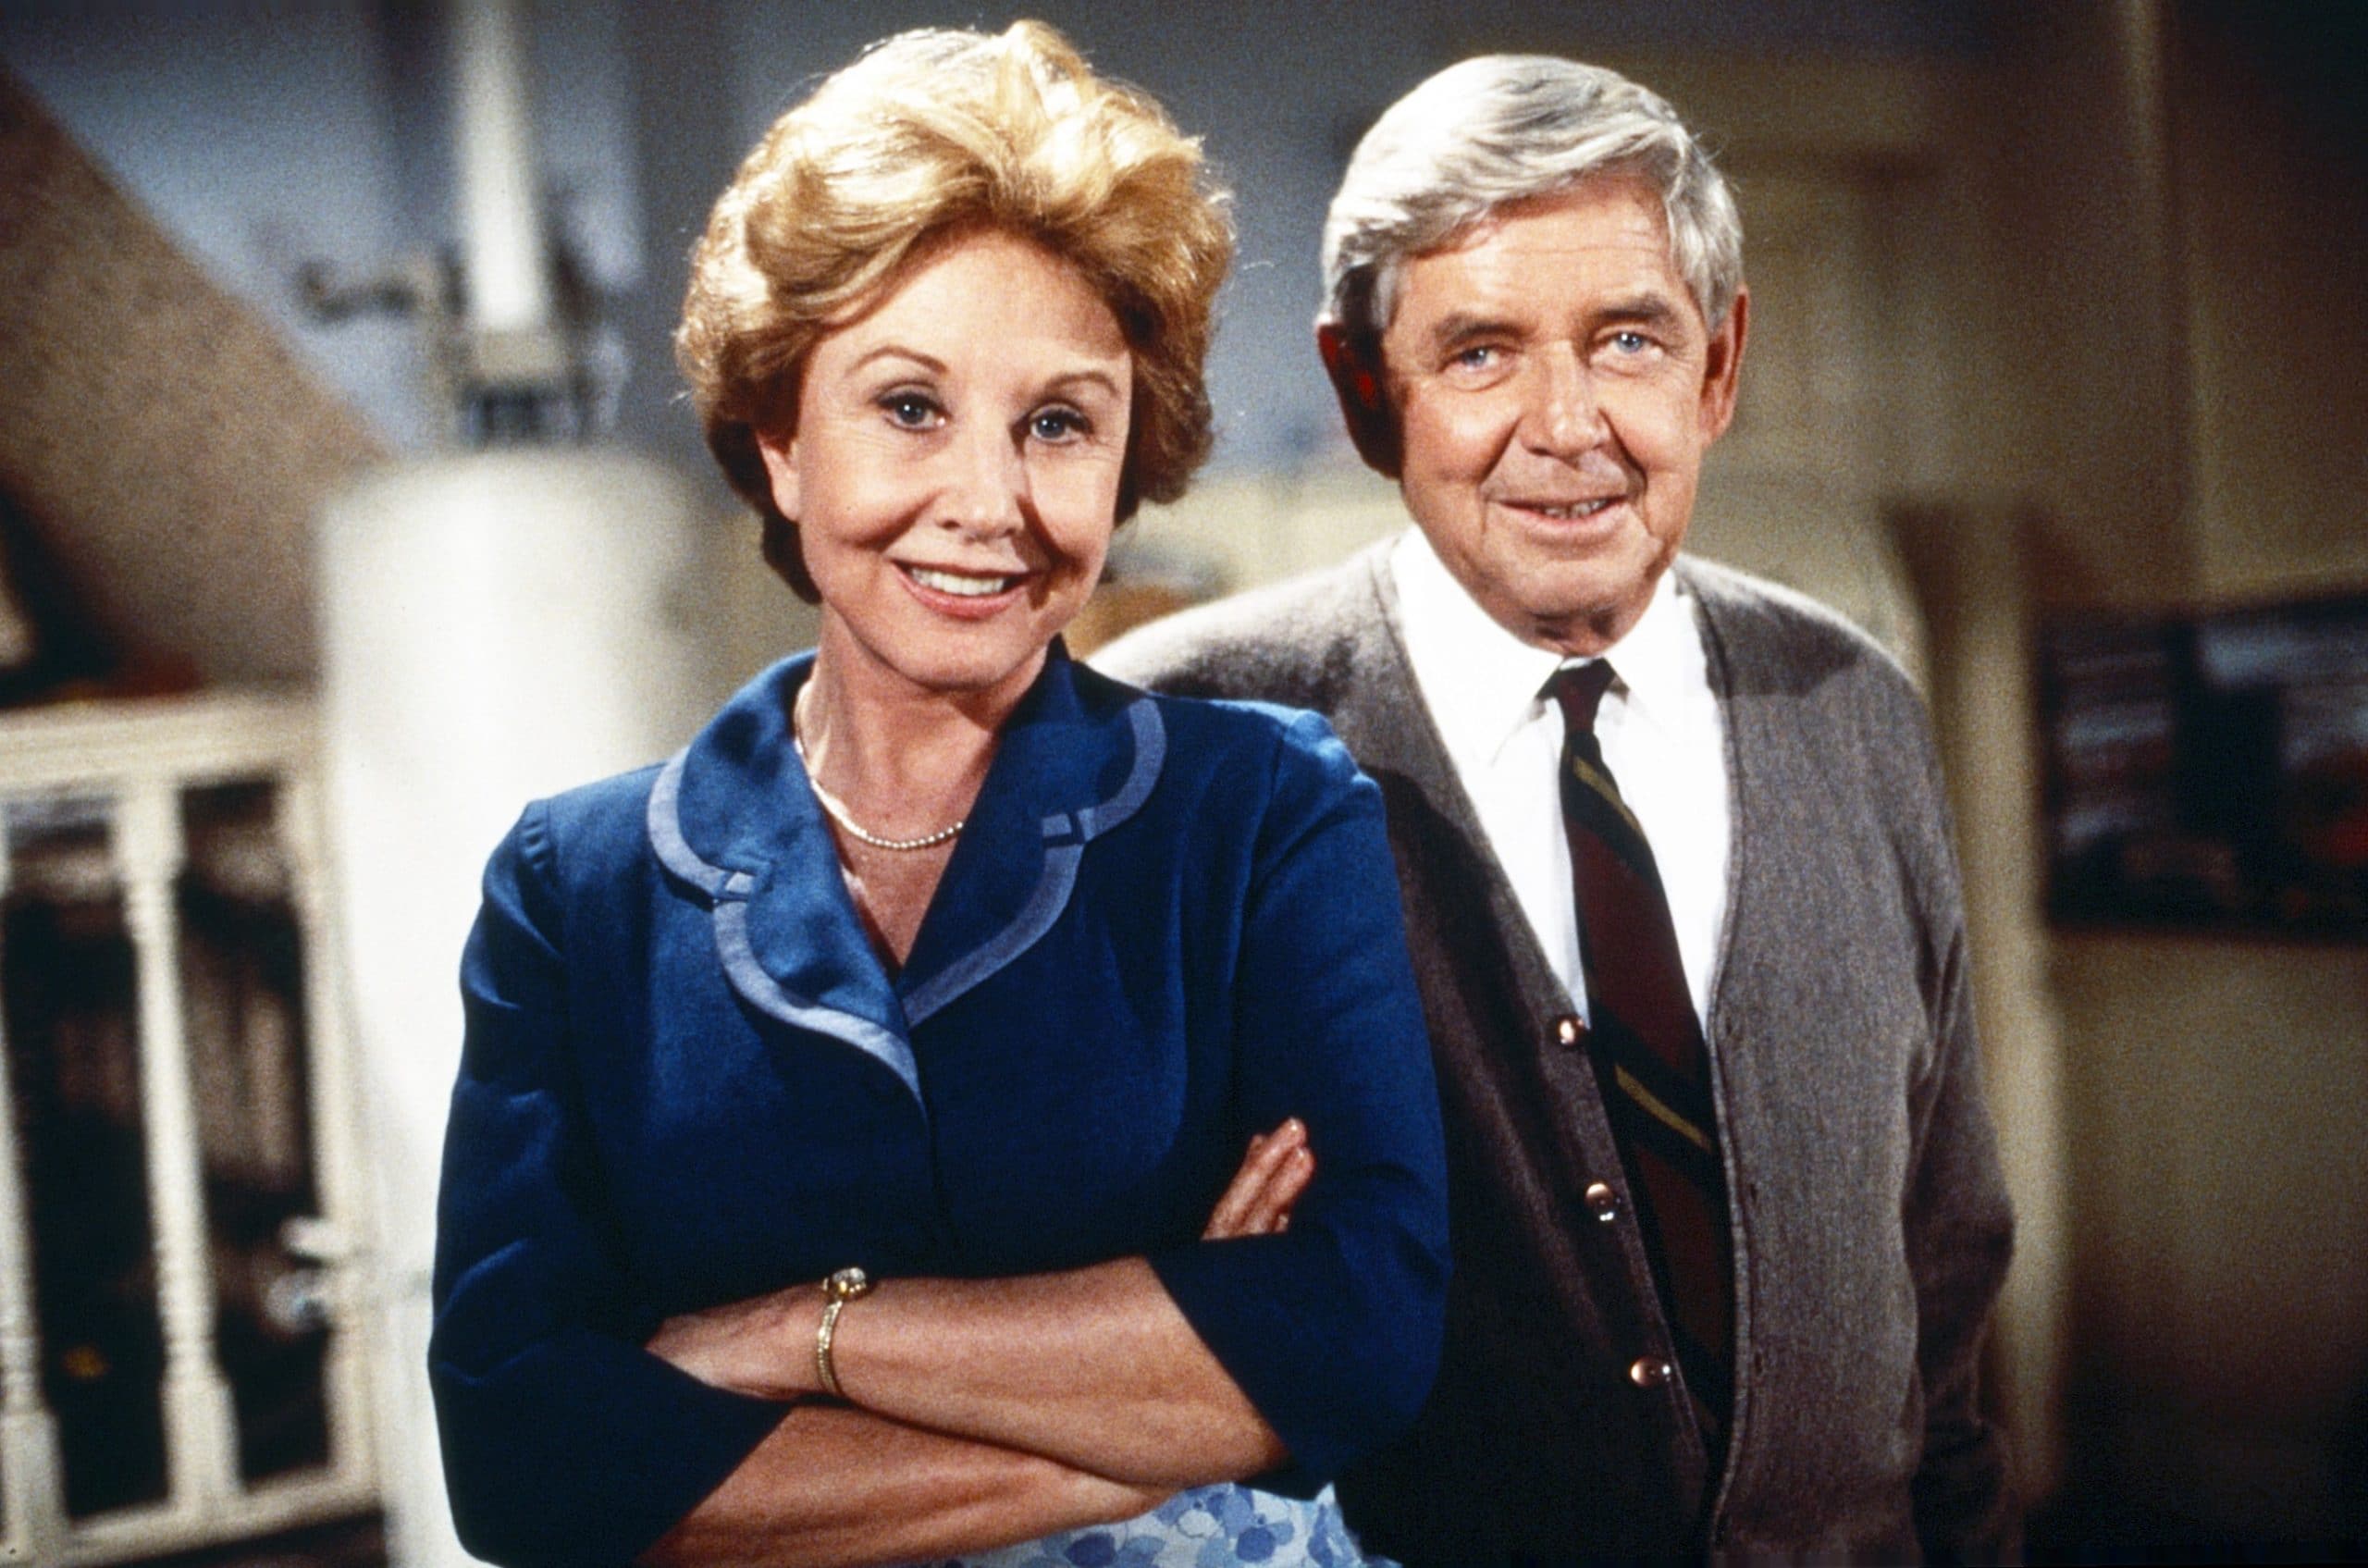 A WALTON THANKSGIVING REUNION, from left: Michael Learned, Ralph Waite